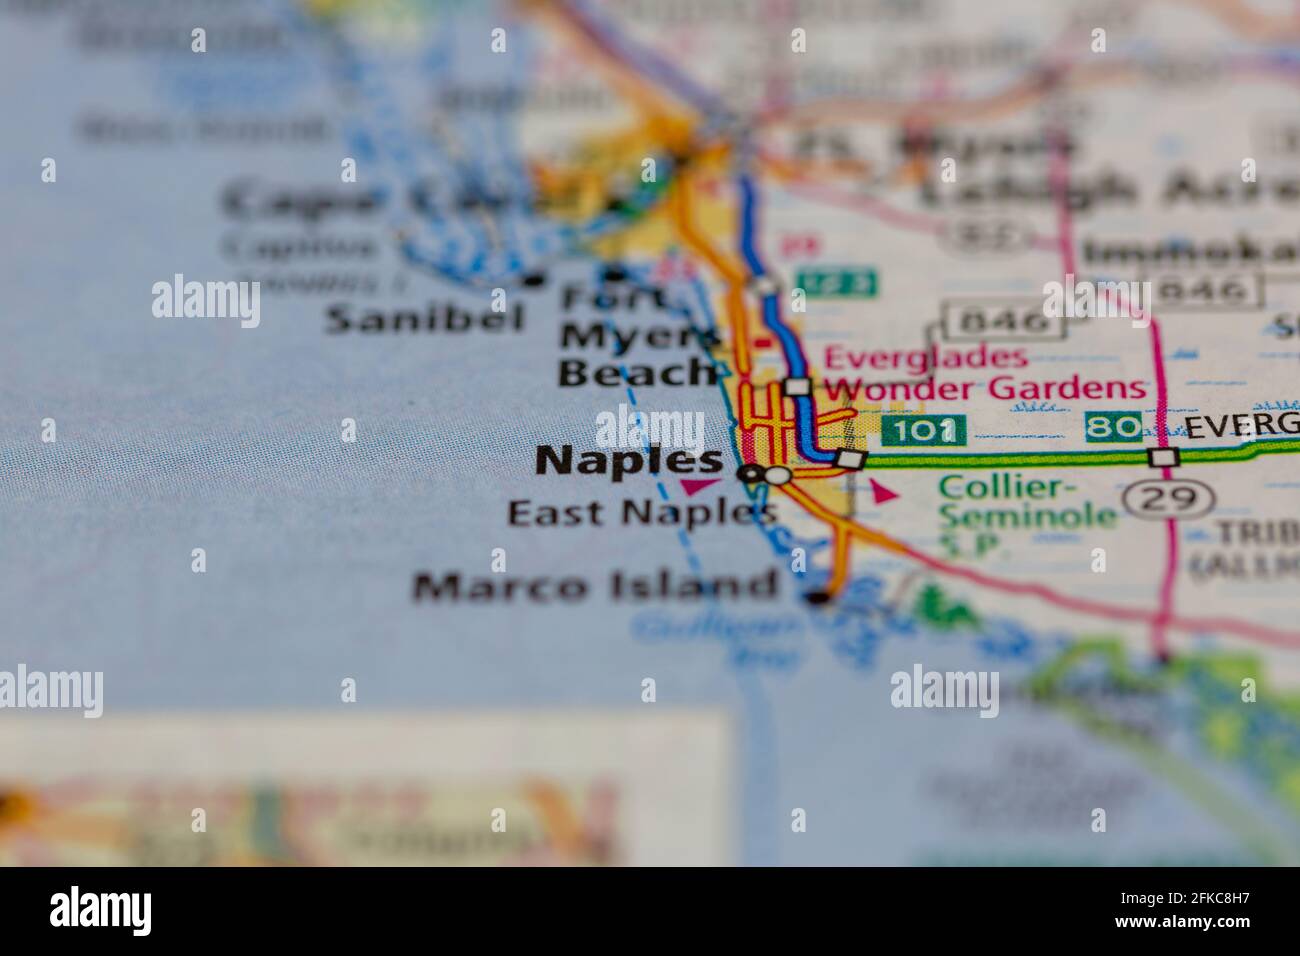 Naples Florida Usa Shown On A Geography Map Or Road Map Stock Photo Alamy